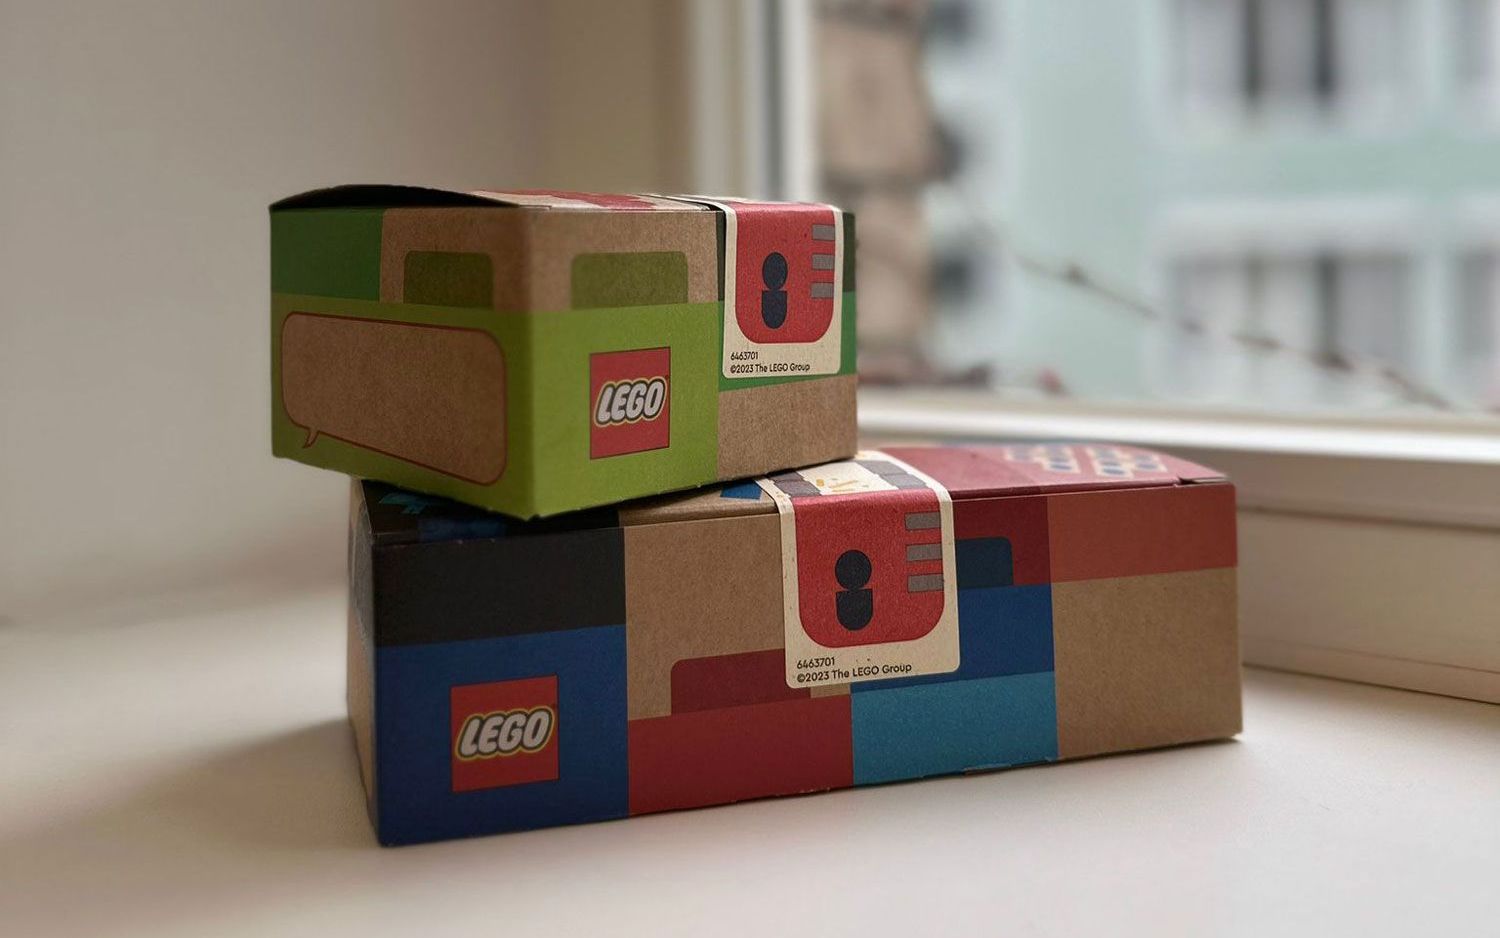 A look at the Pick a Brick cardboard boxes